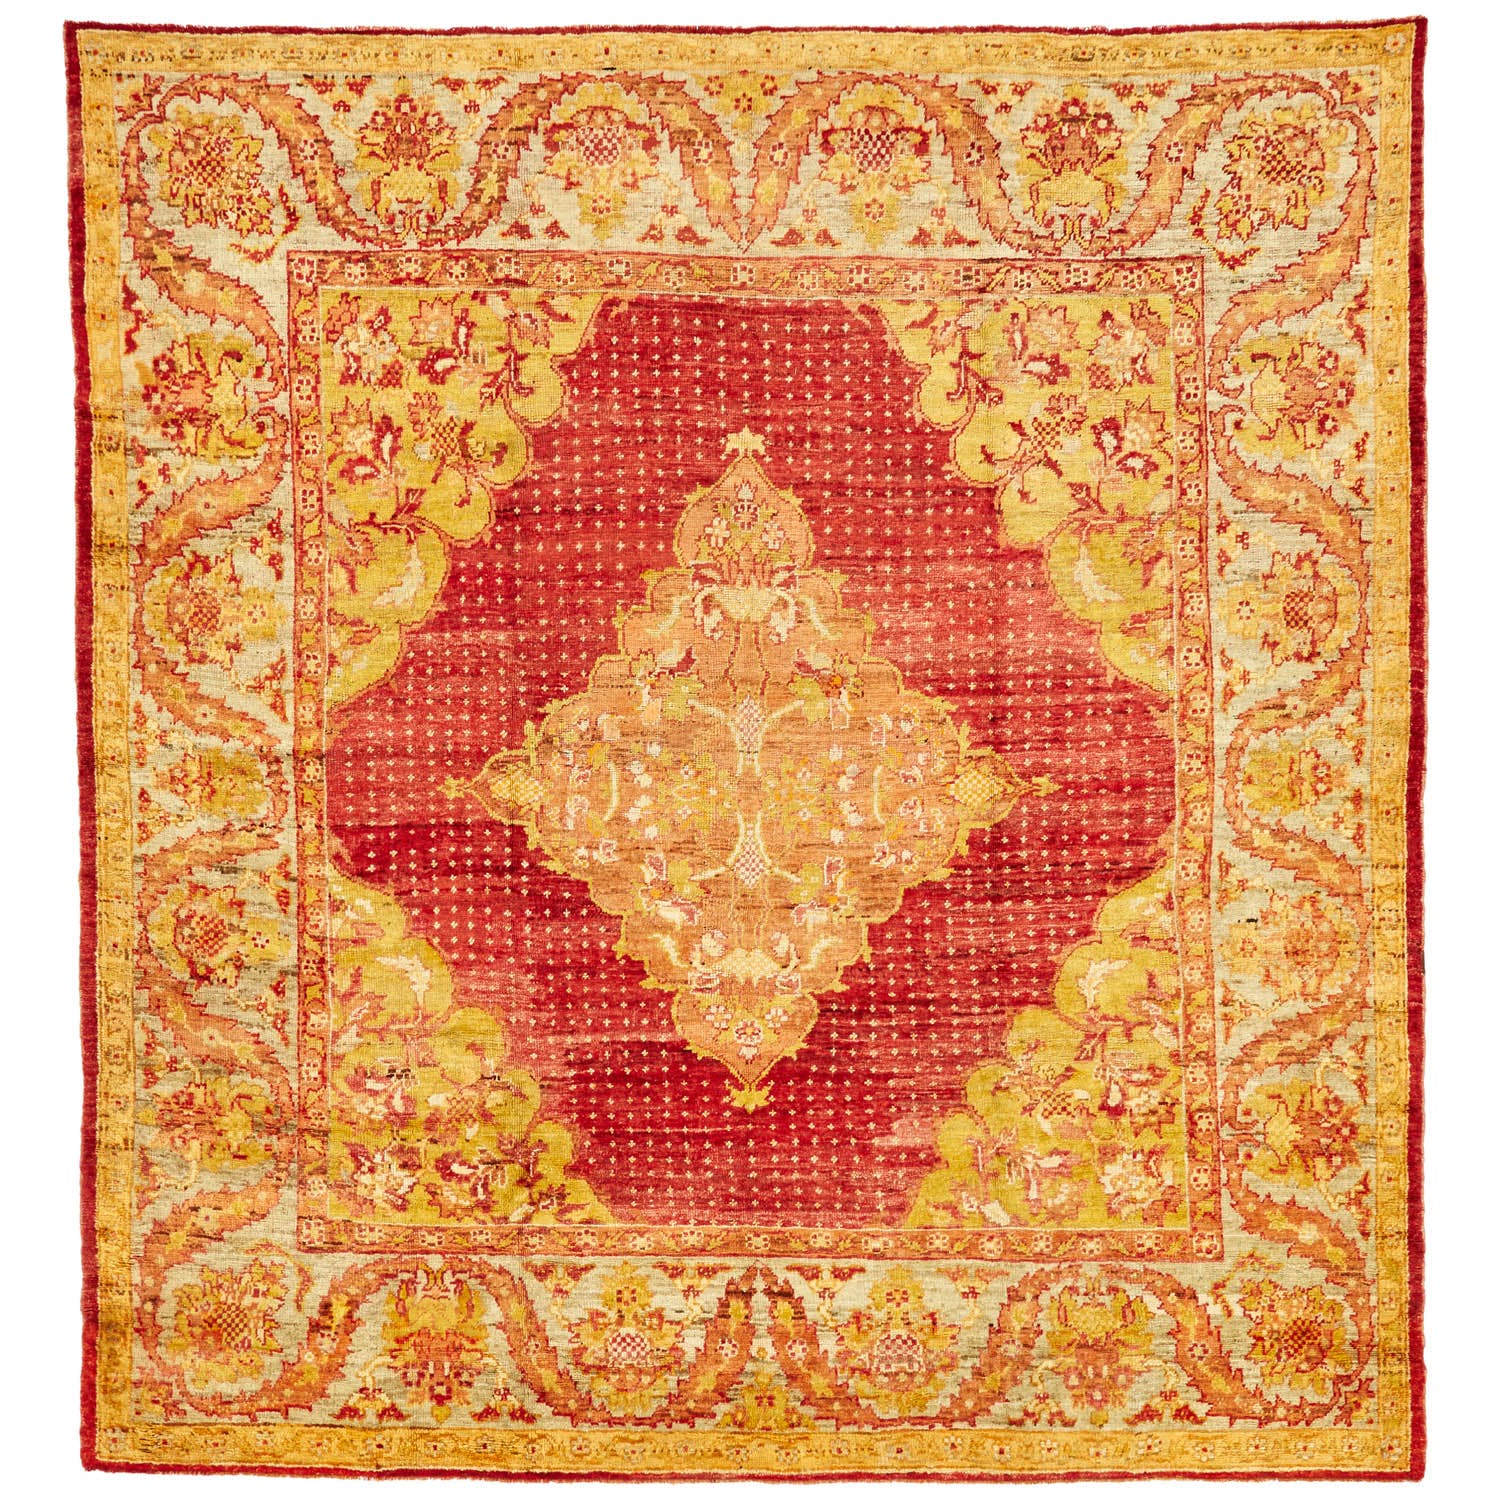 Exquisite Persian carpet with intricate designs in rich red tones.